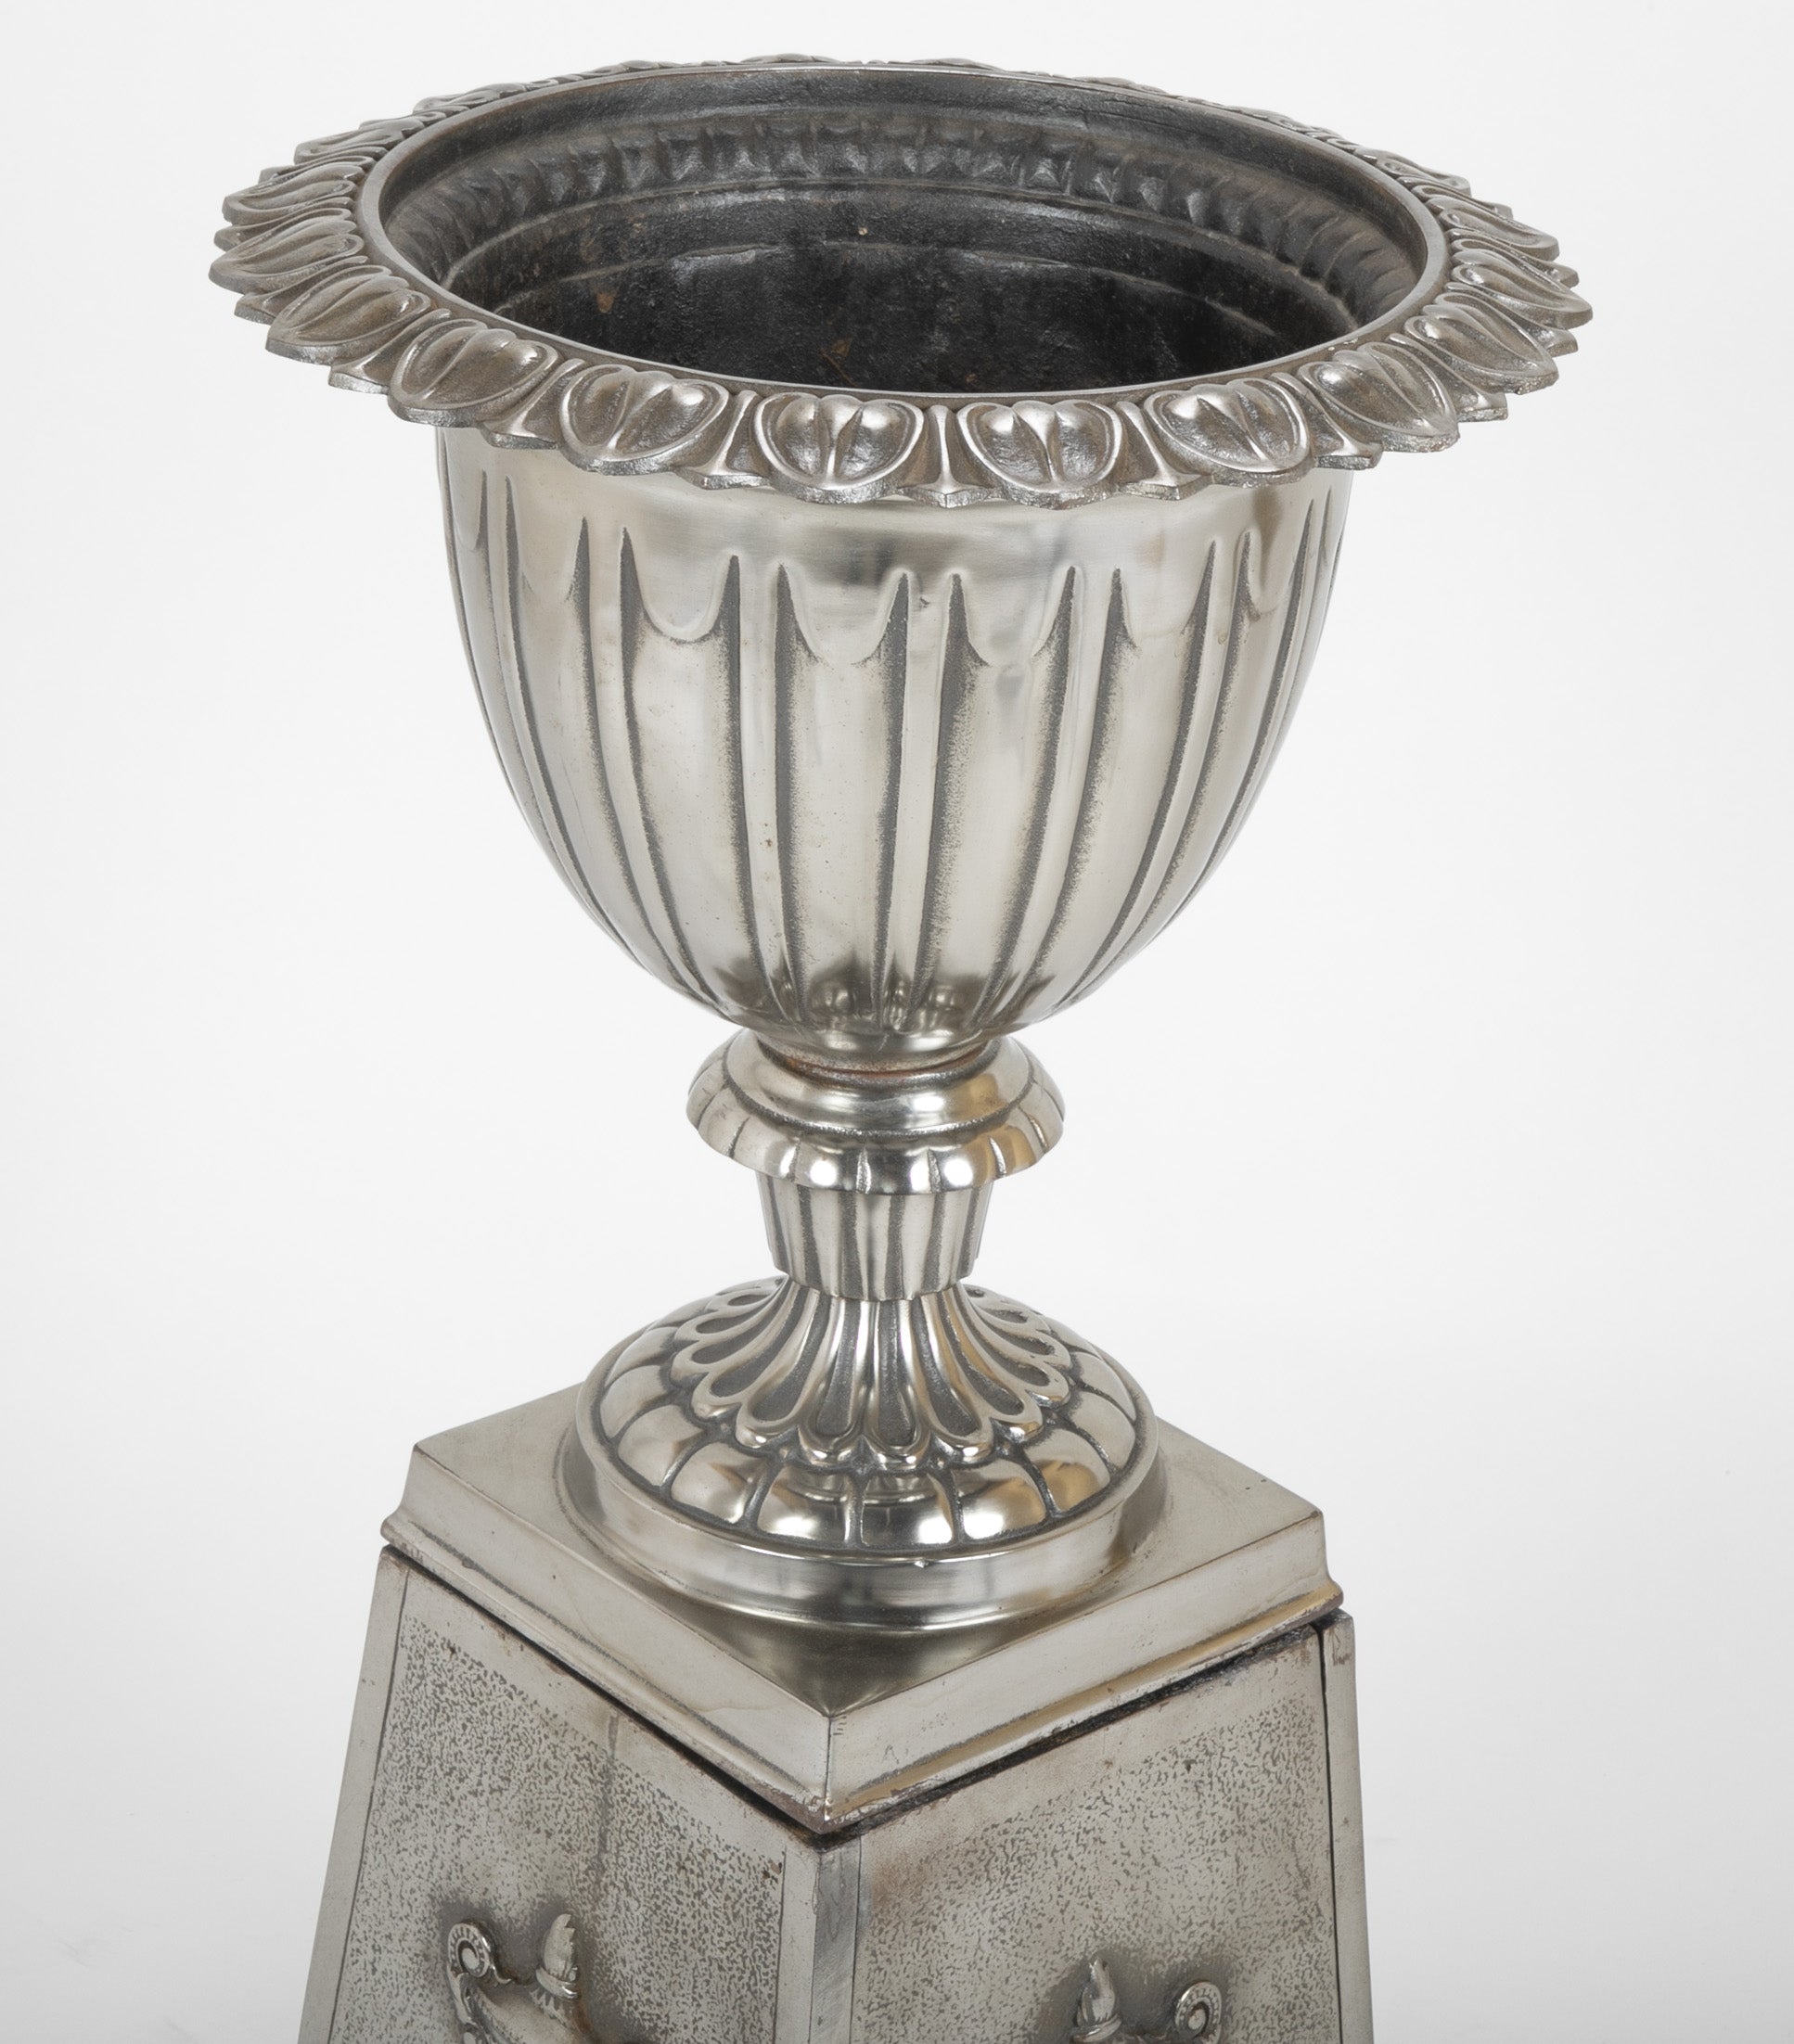 Late 19th Century Polished Cast Iron Garden Urn